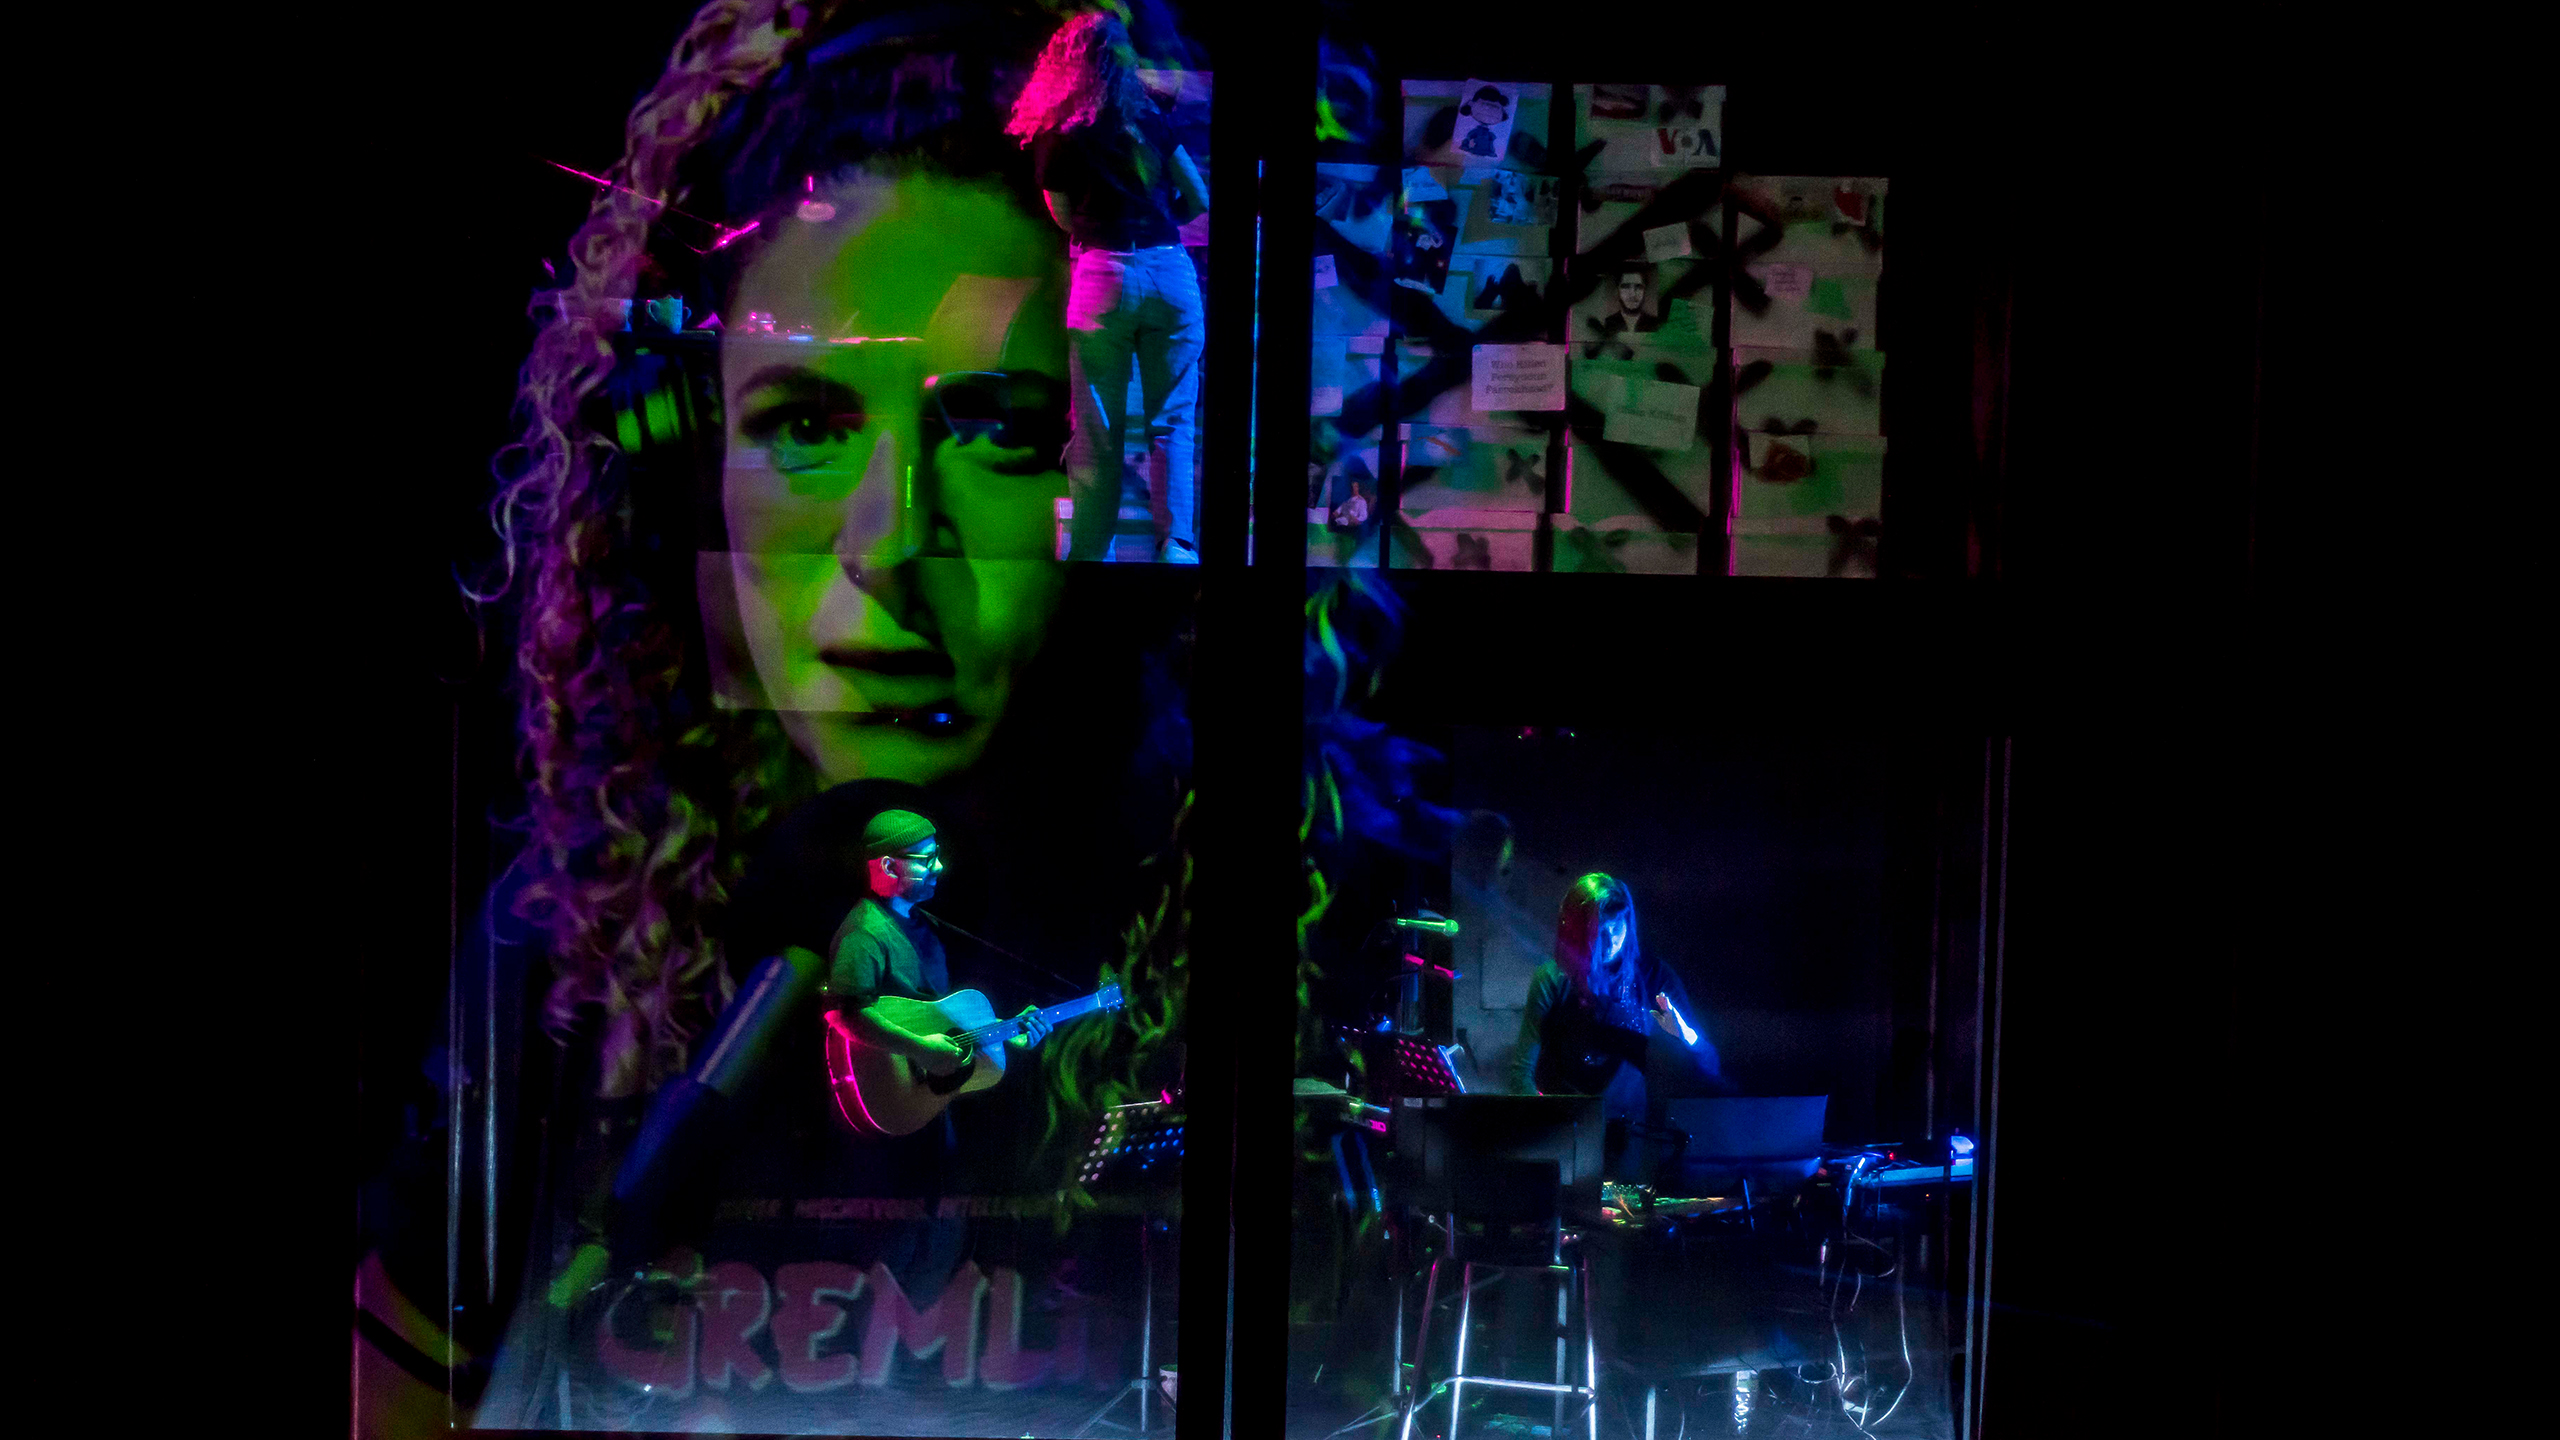 A man wearing a beanie plays the guitar while a woman next to him plays a keyboard, They are surrounded by a projection of a woman's face, and the lighting is green, purple and blue.